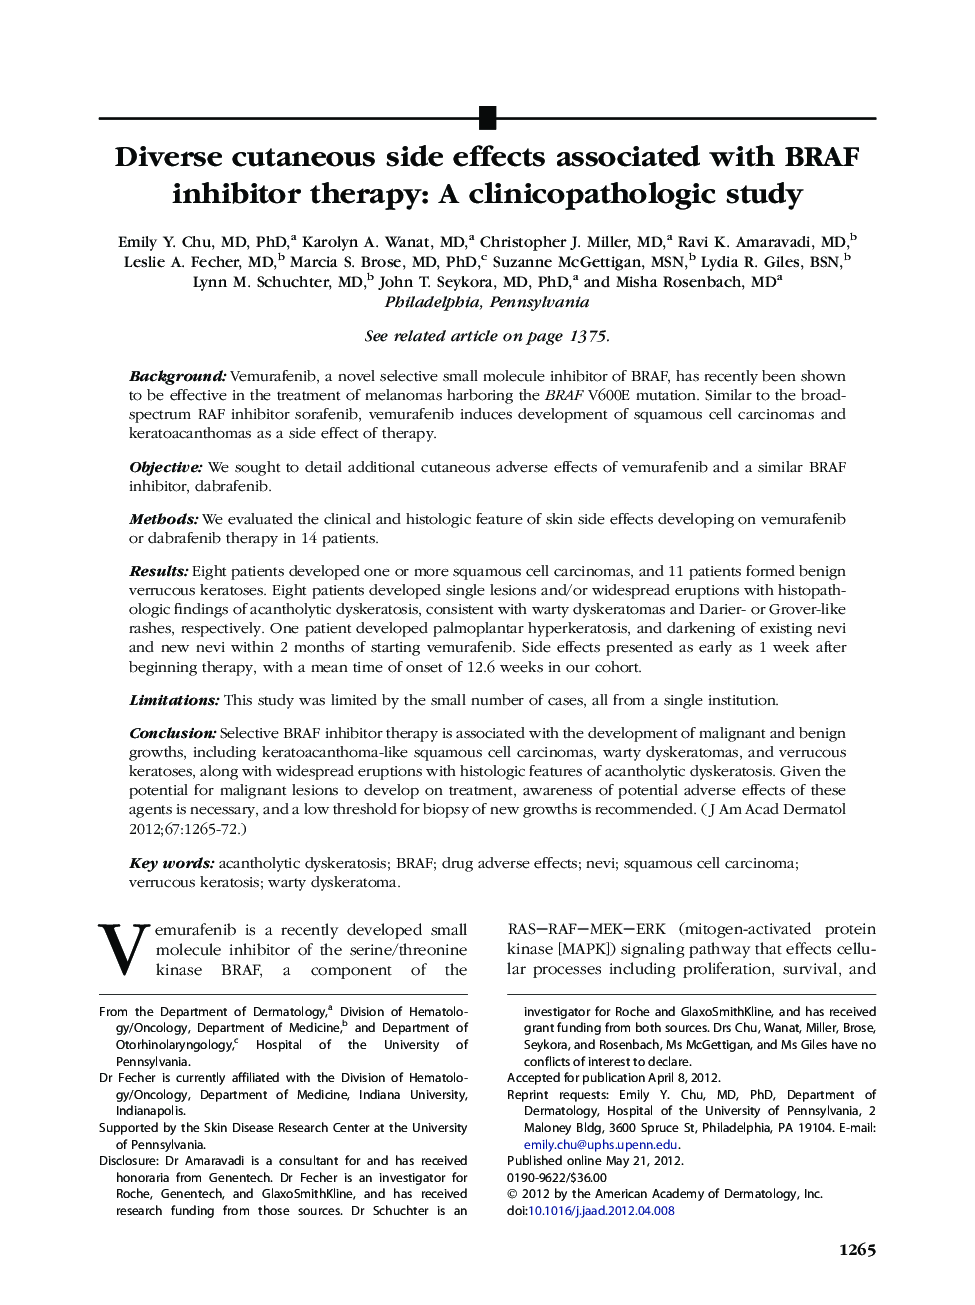 Diverse cutaneous side effects associated with BRAF inhibitor therapy: A clinicopathologic study 